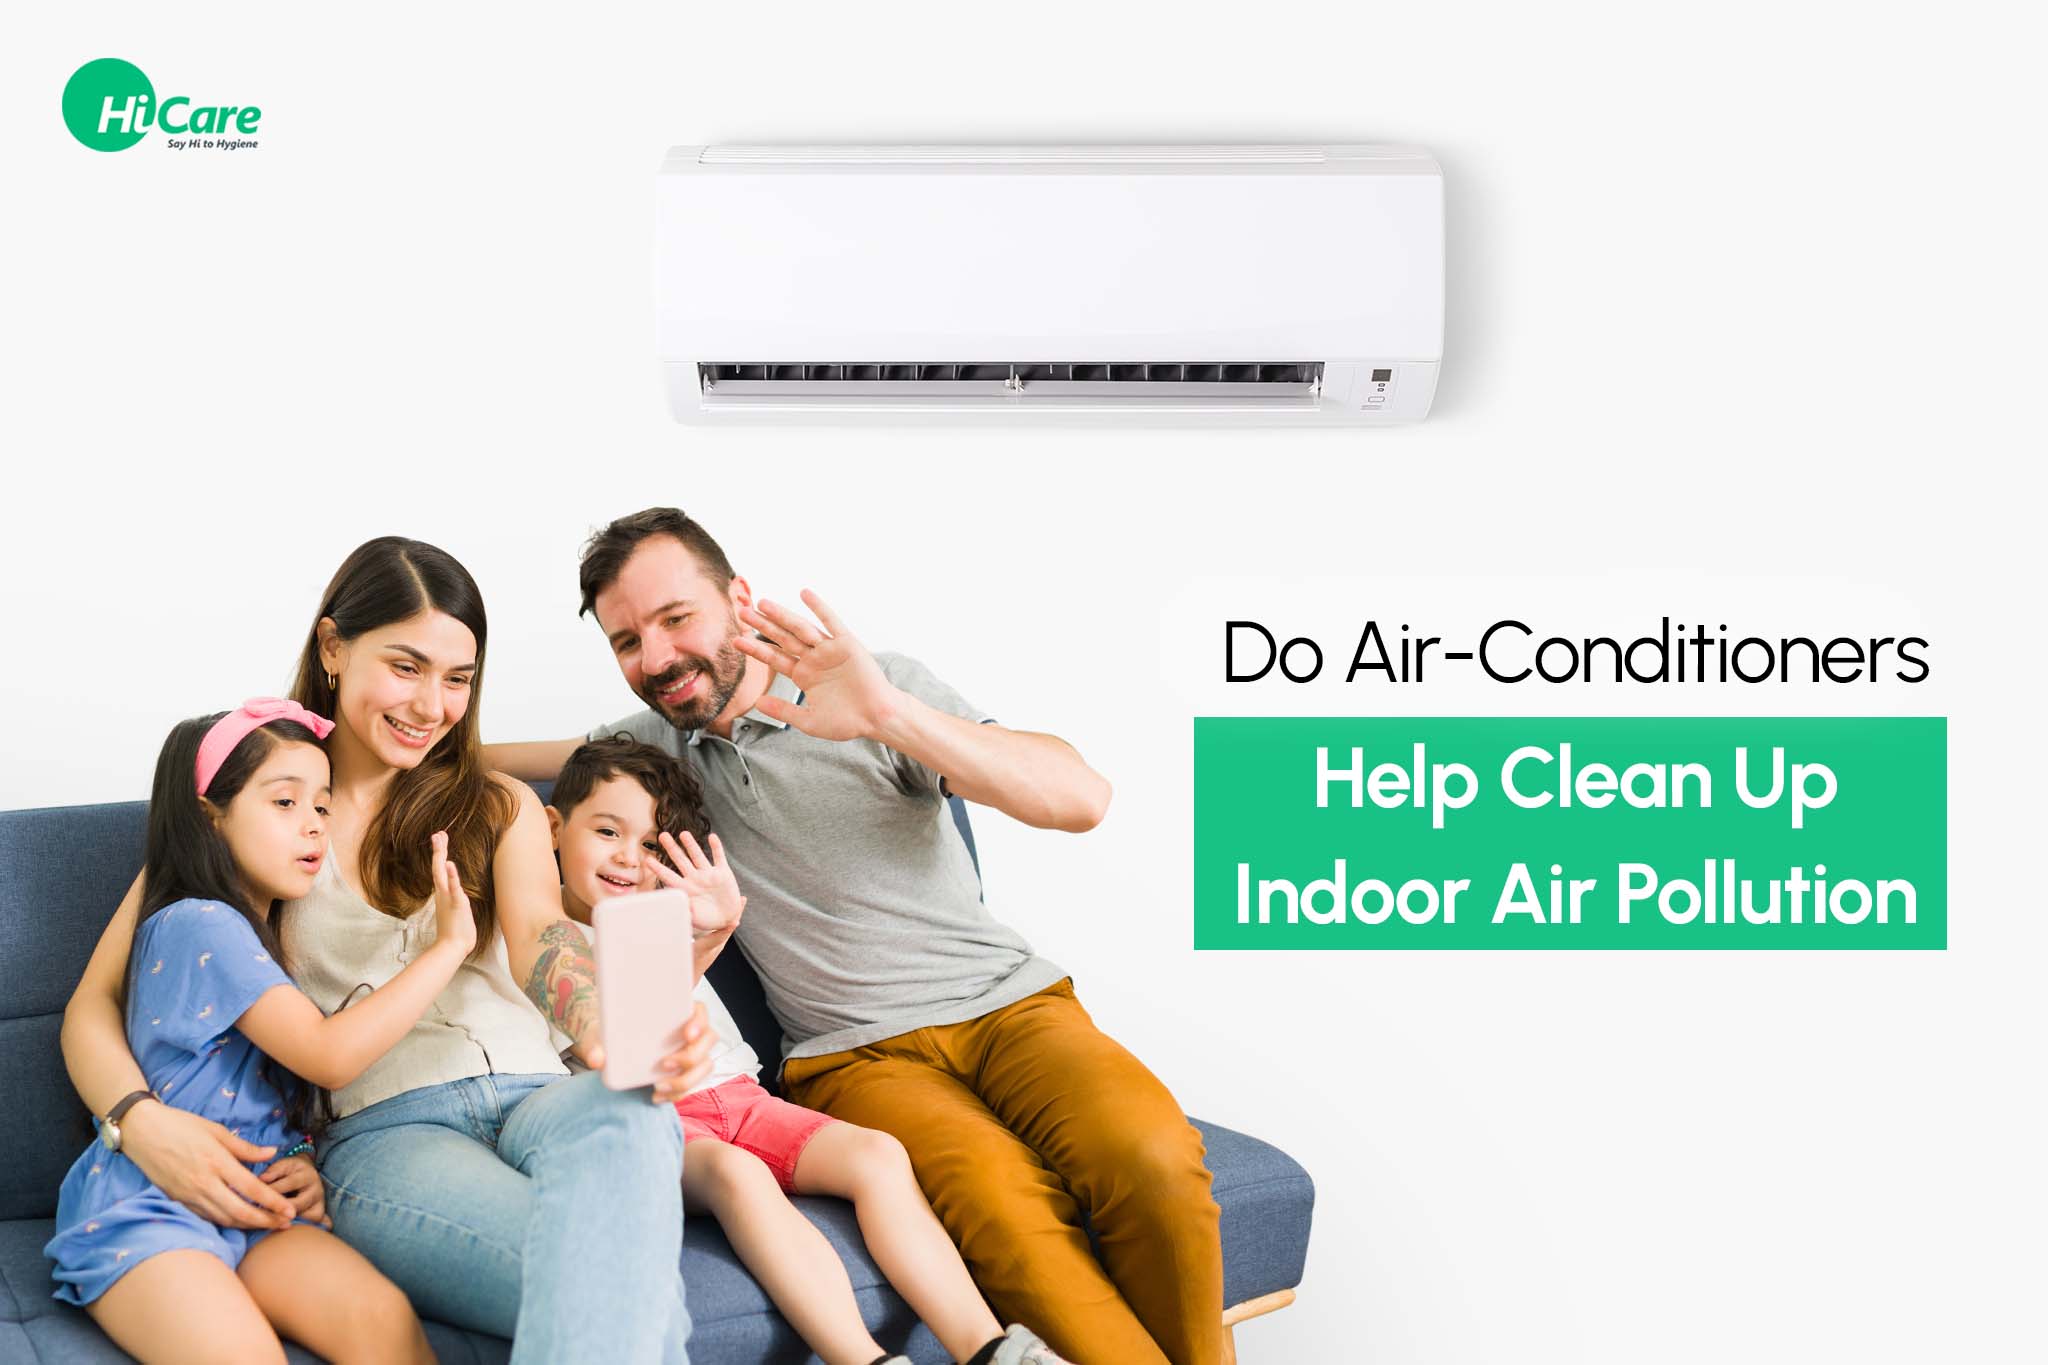 Do Air-Conditioners Help Clean Up Indoor Air Pollution